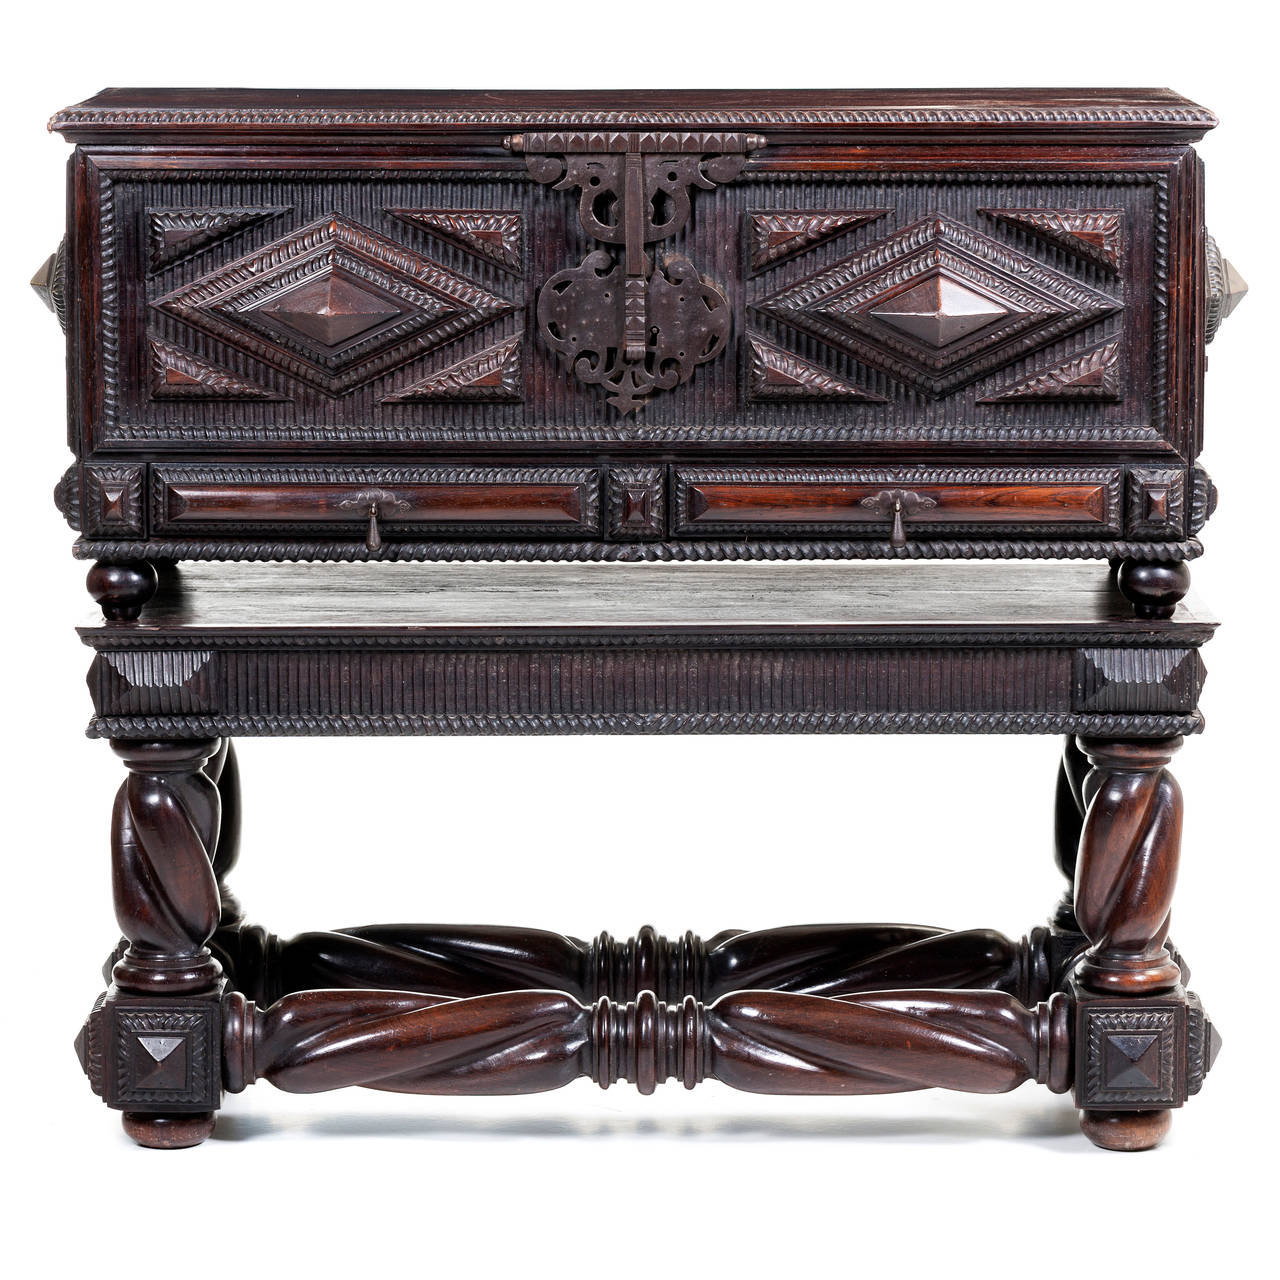 A magnificent Portuguese Baroque chest circa 19th century superbly carved out of solid Brazilian rosewood, with two lateral doors and brass mounts. The interior locks were removed.
The lower case on spiral turned stretchers entirely carved of solid